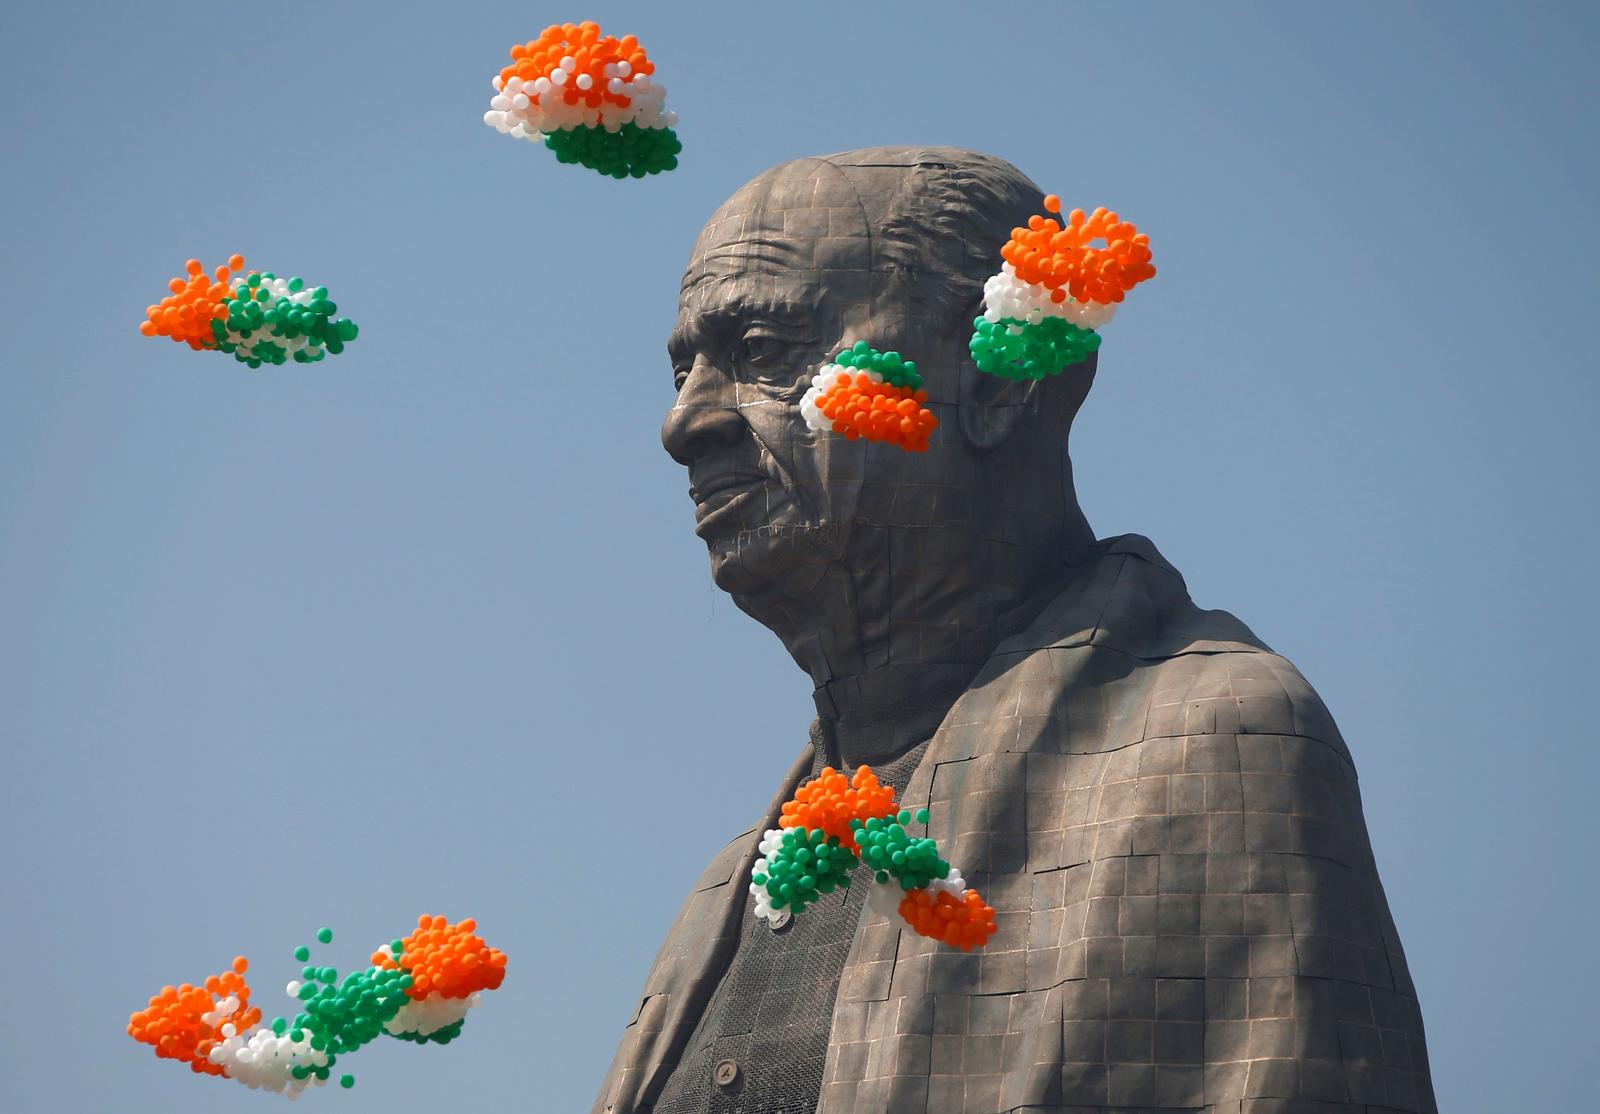 Indian tri-coloured balloons fly around the “Statue of Unity” portraying Sardar Vallabhbhai Patel, one of the founding fathers of India, during its inauguration in Kevadia